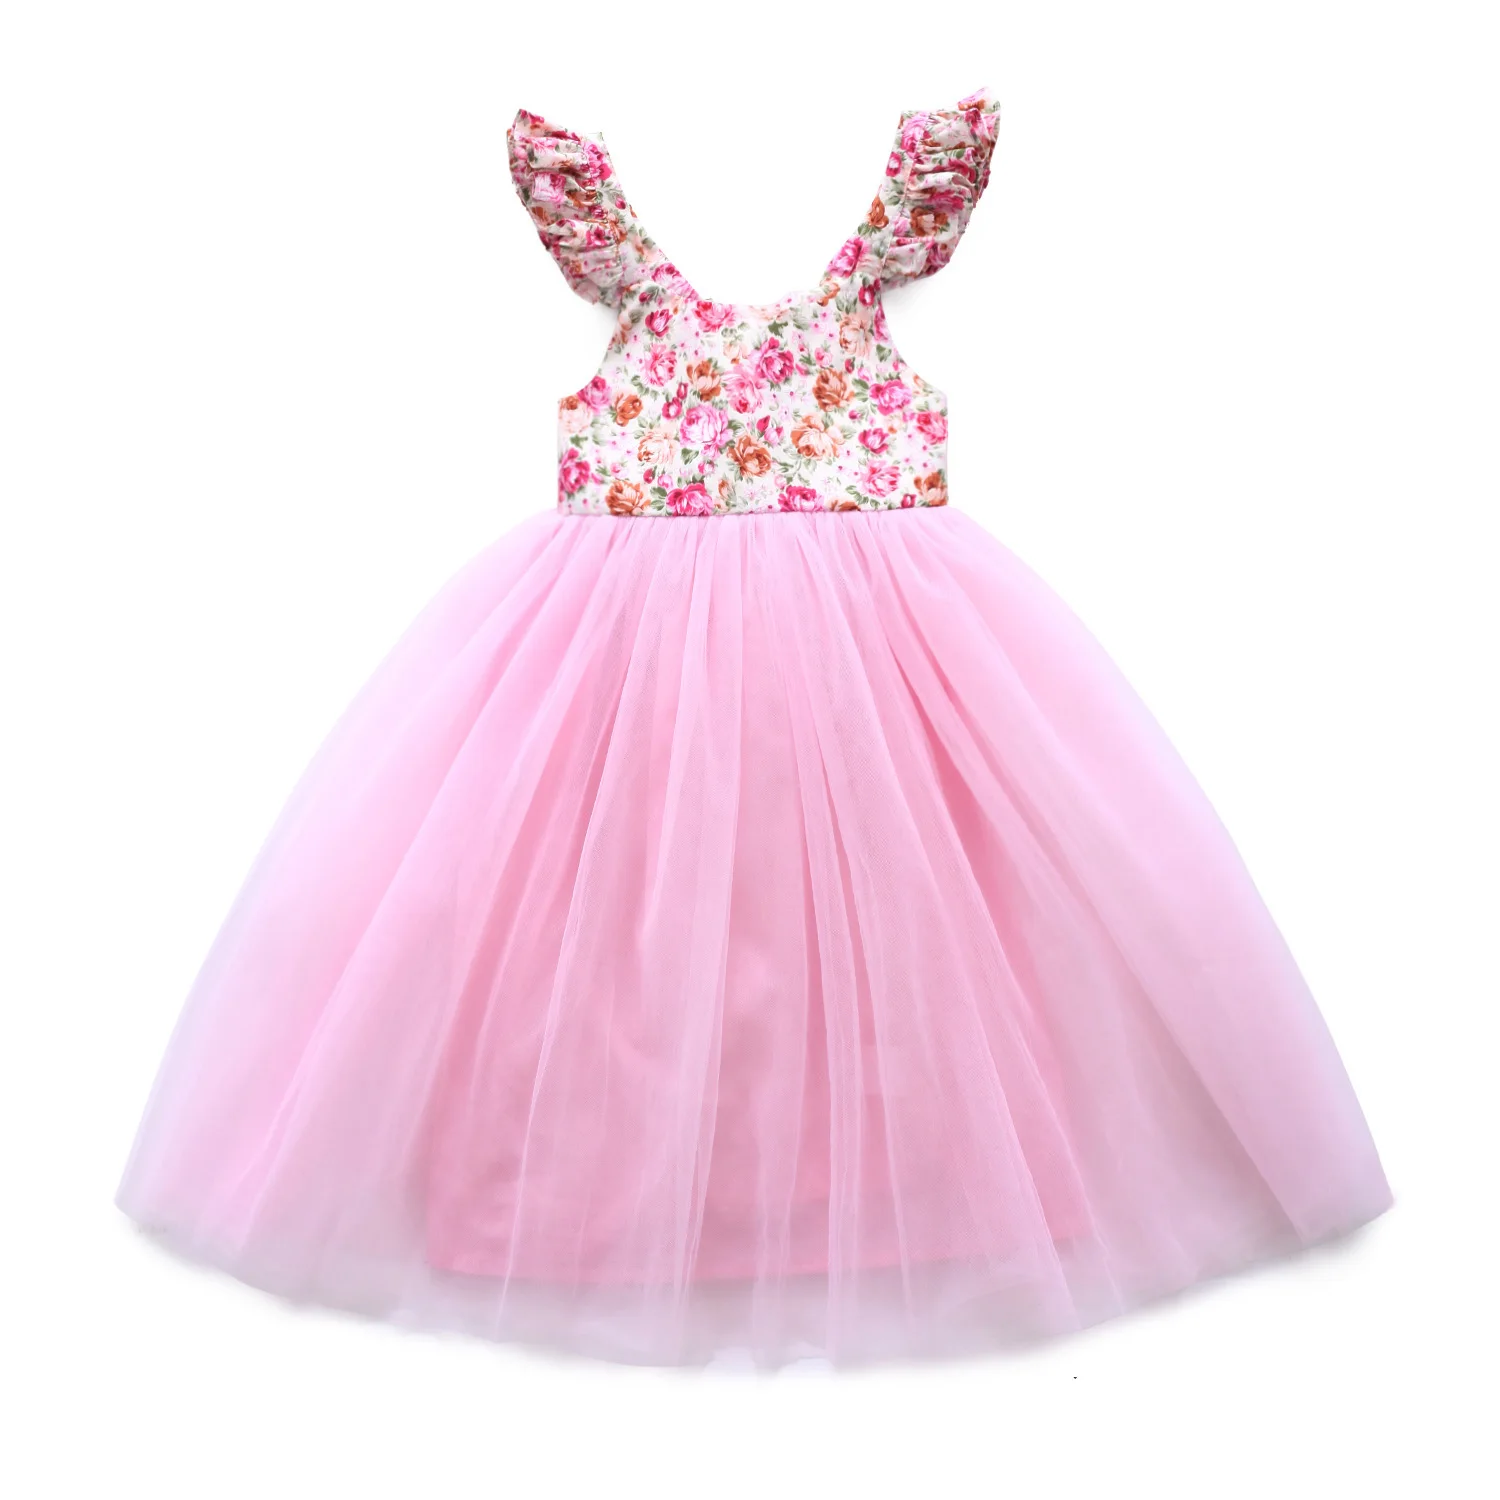 Om Infant Pageant Girls Size 4t Dresses Top Cotton Tulle Skirt Next ...